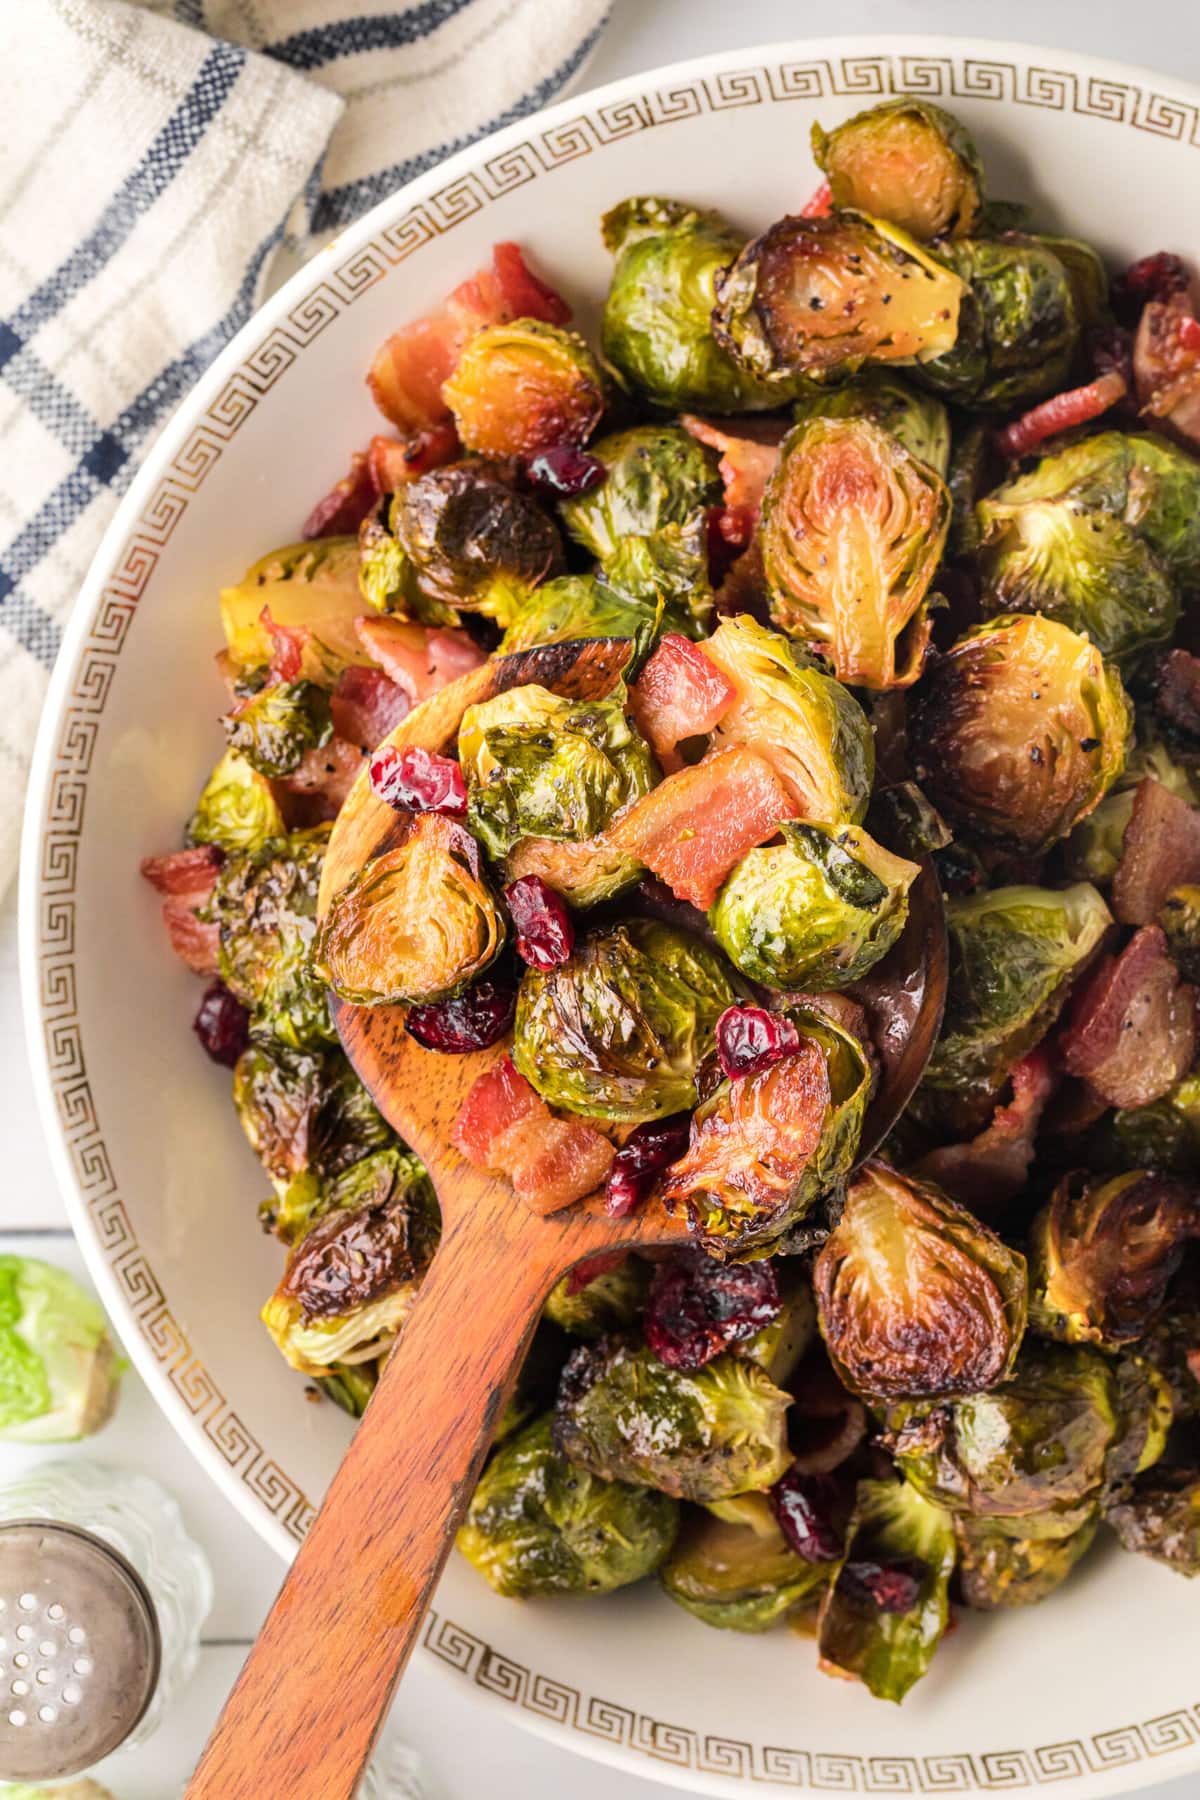 Roasted brussels sprouts with bacon and cranberries being spooned out of the serving bowl with a wooden spoon.